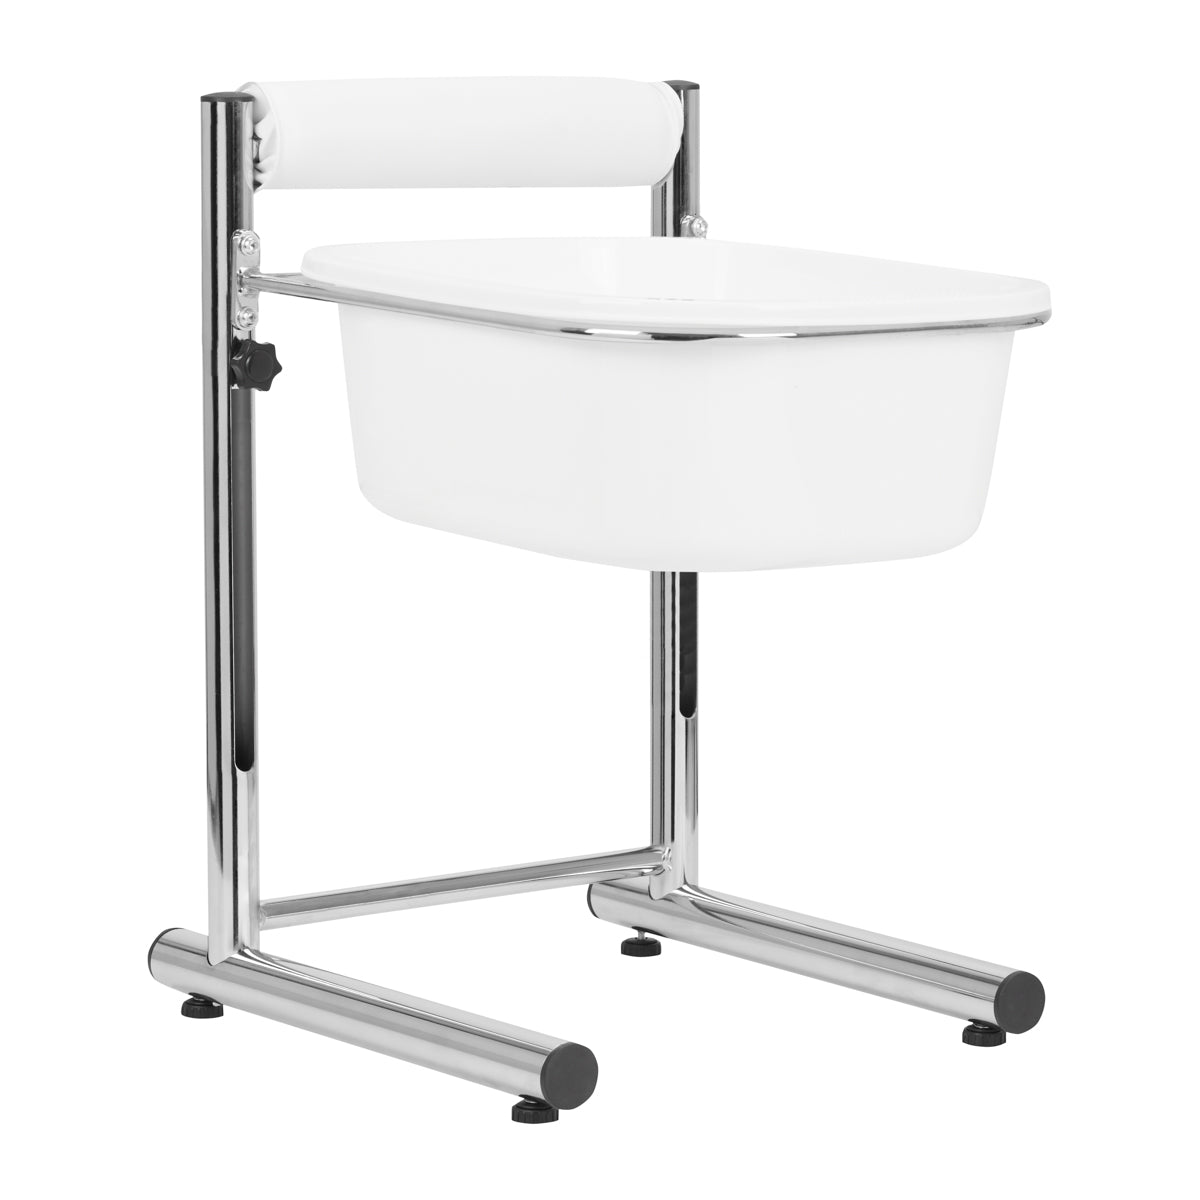 ACTIVESHOP Pedicure tray with adjustable height, chrome